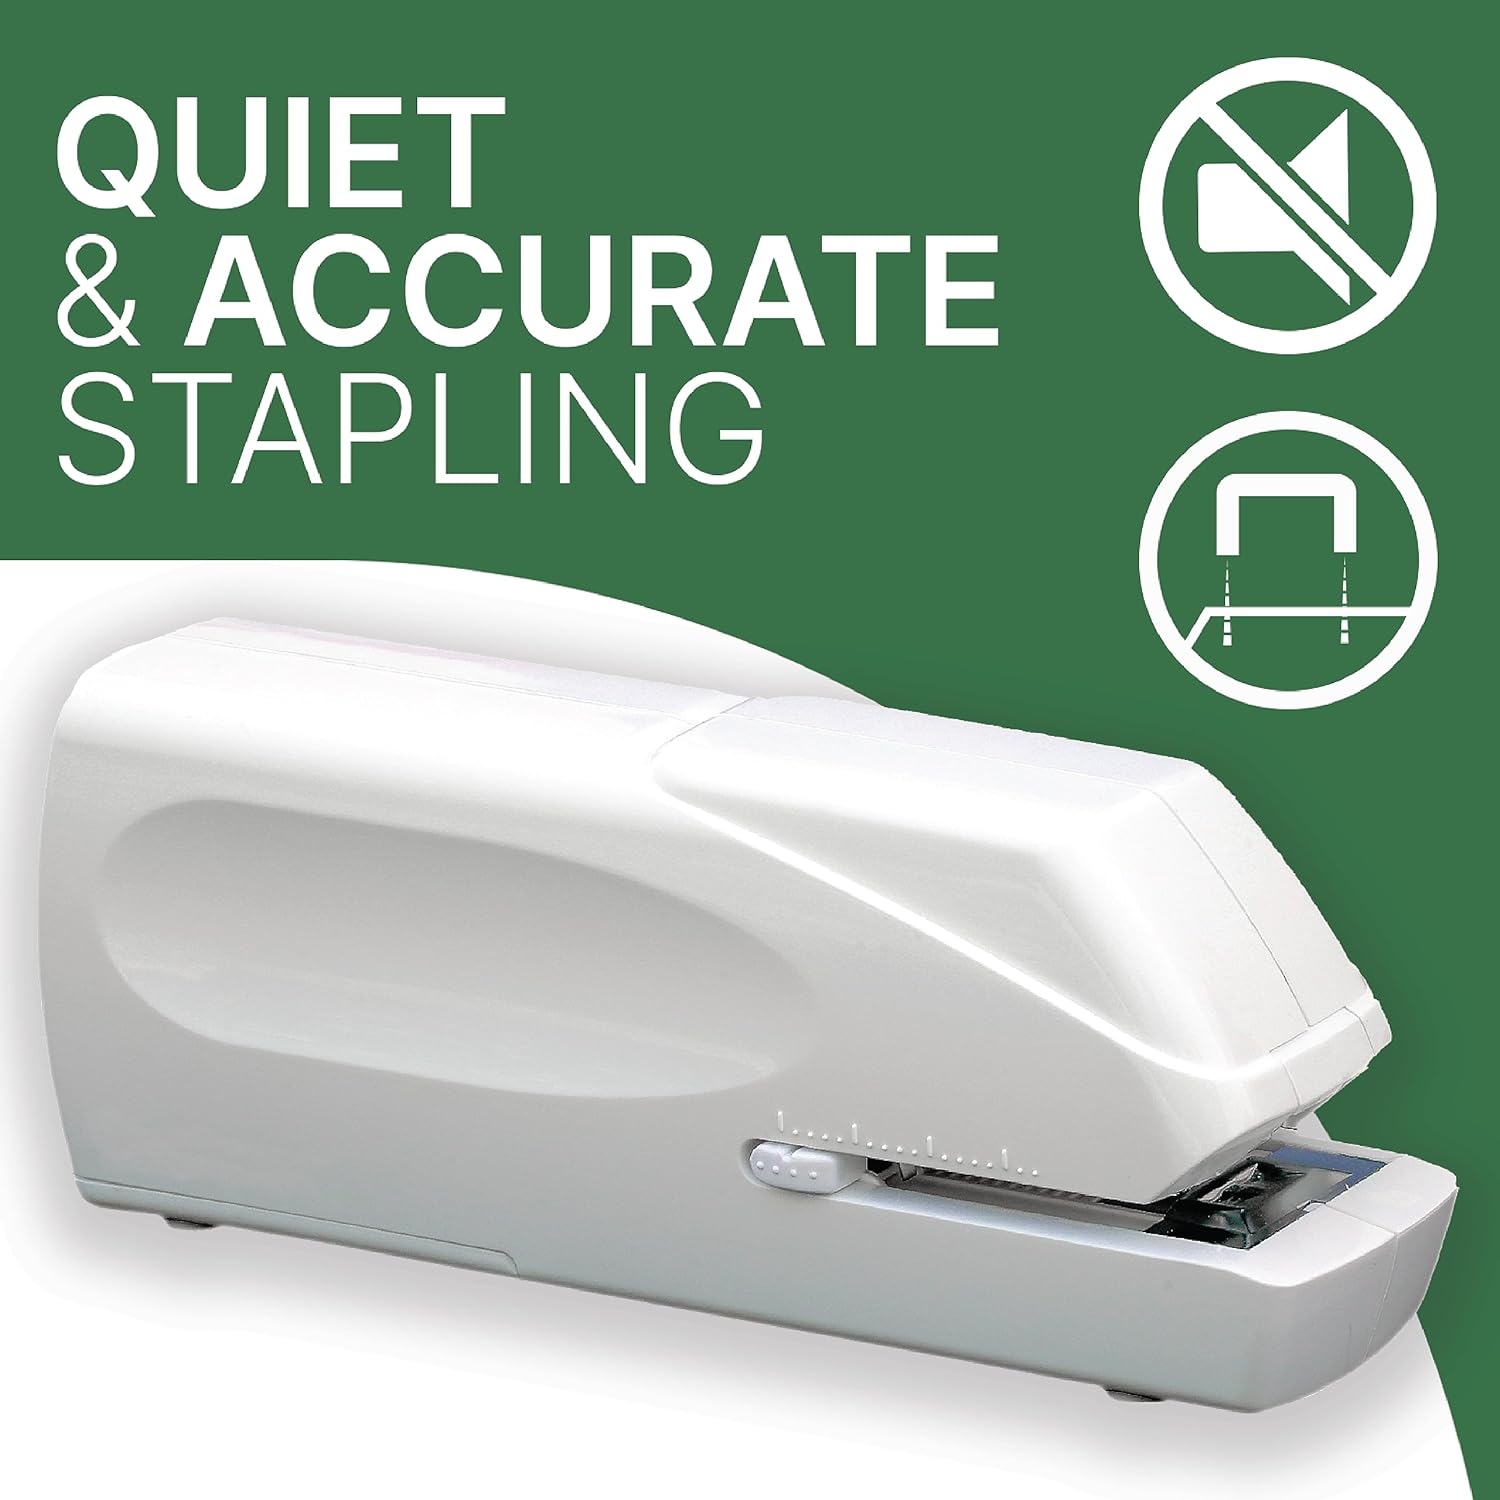 Eco Electronix StaplePro white quite & accurate stapling